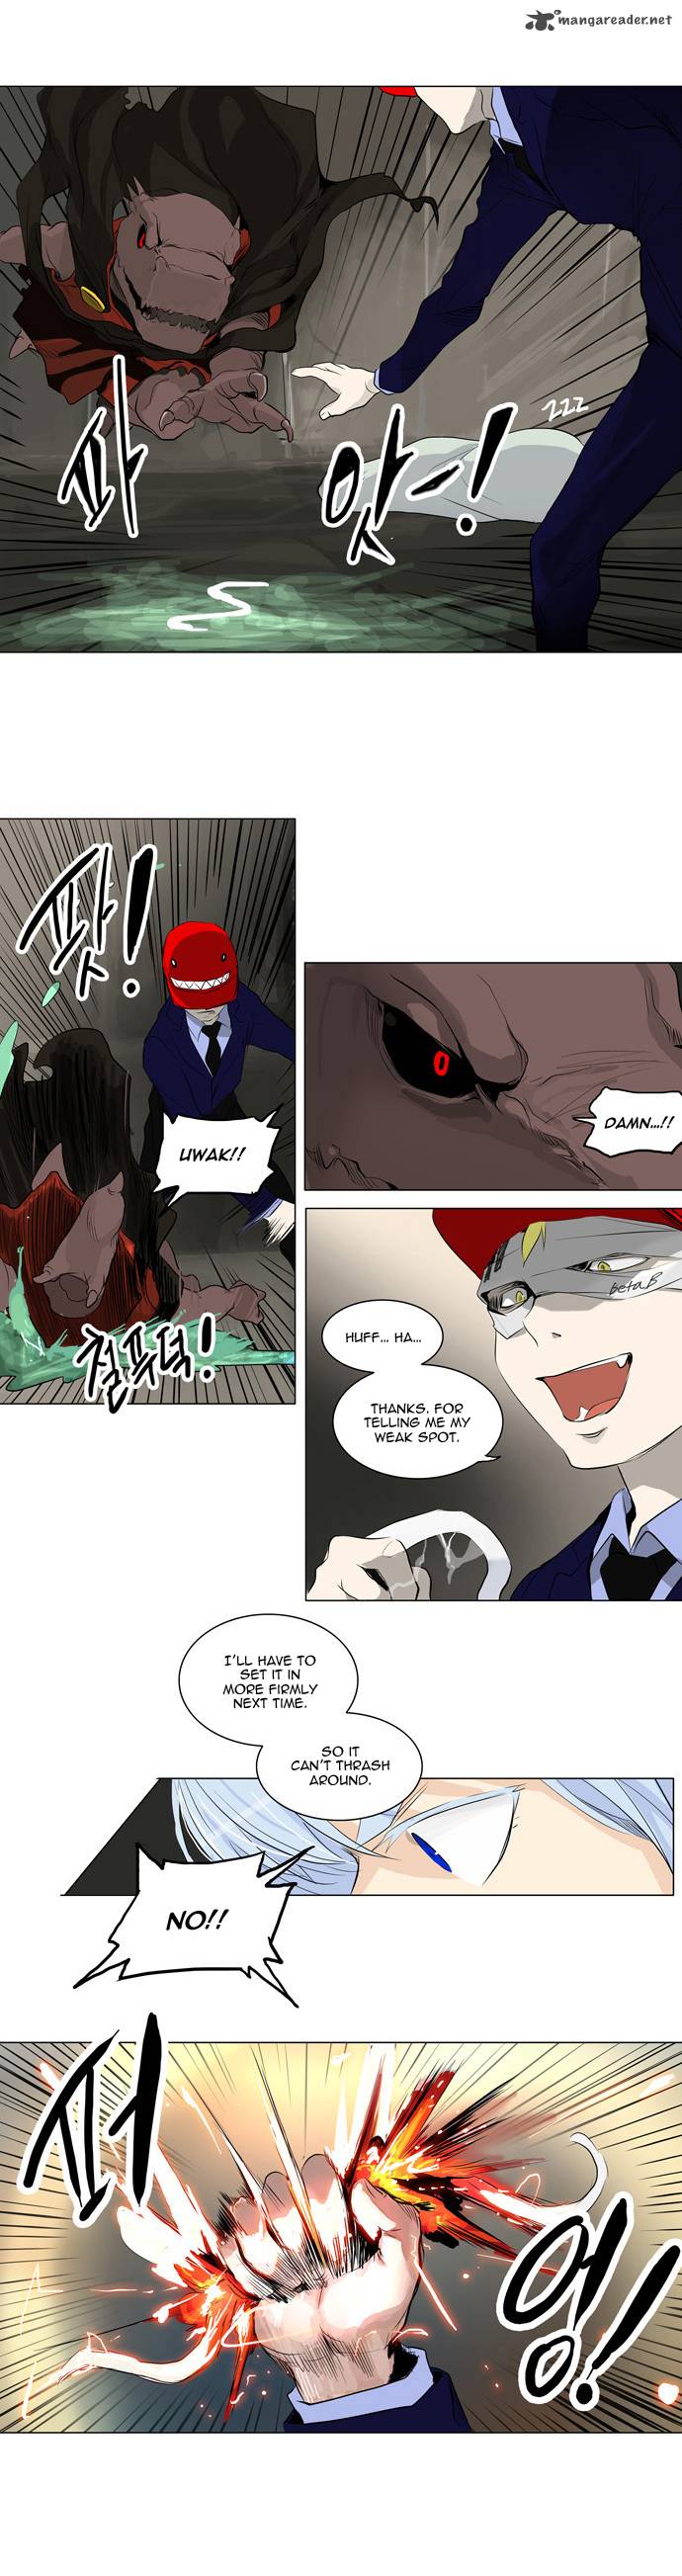 Tower Of God 173 24